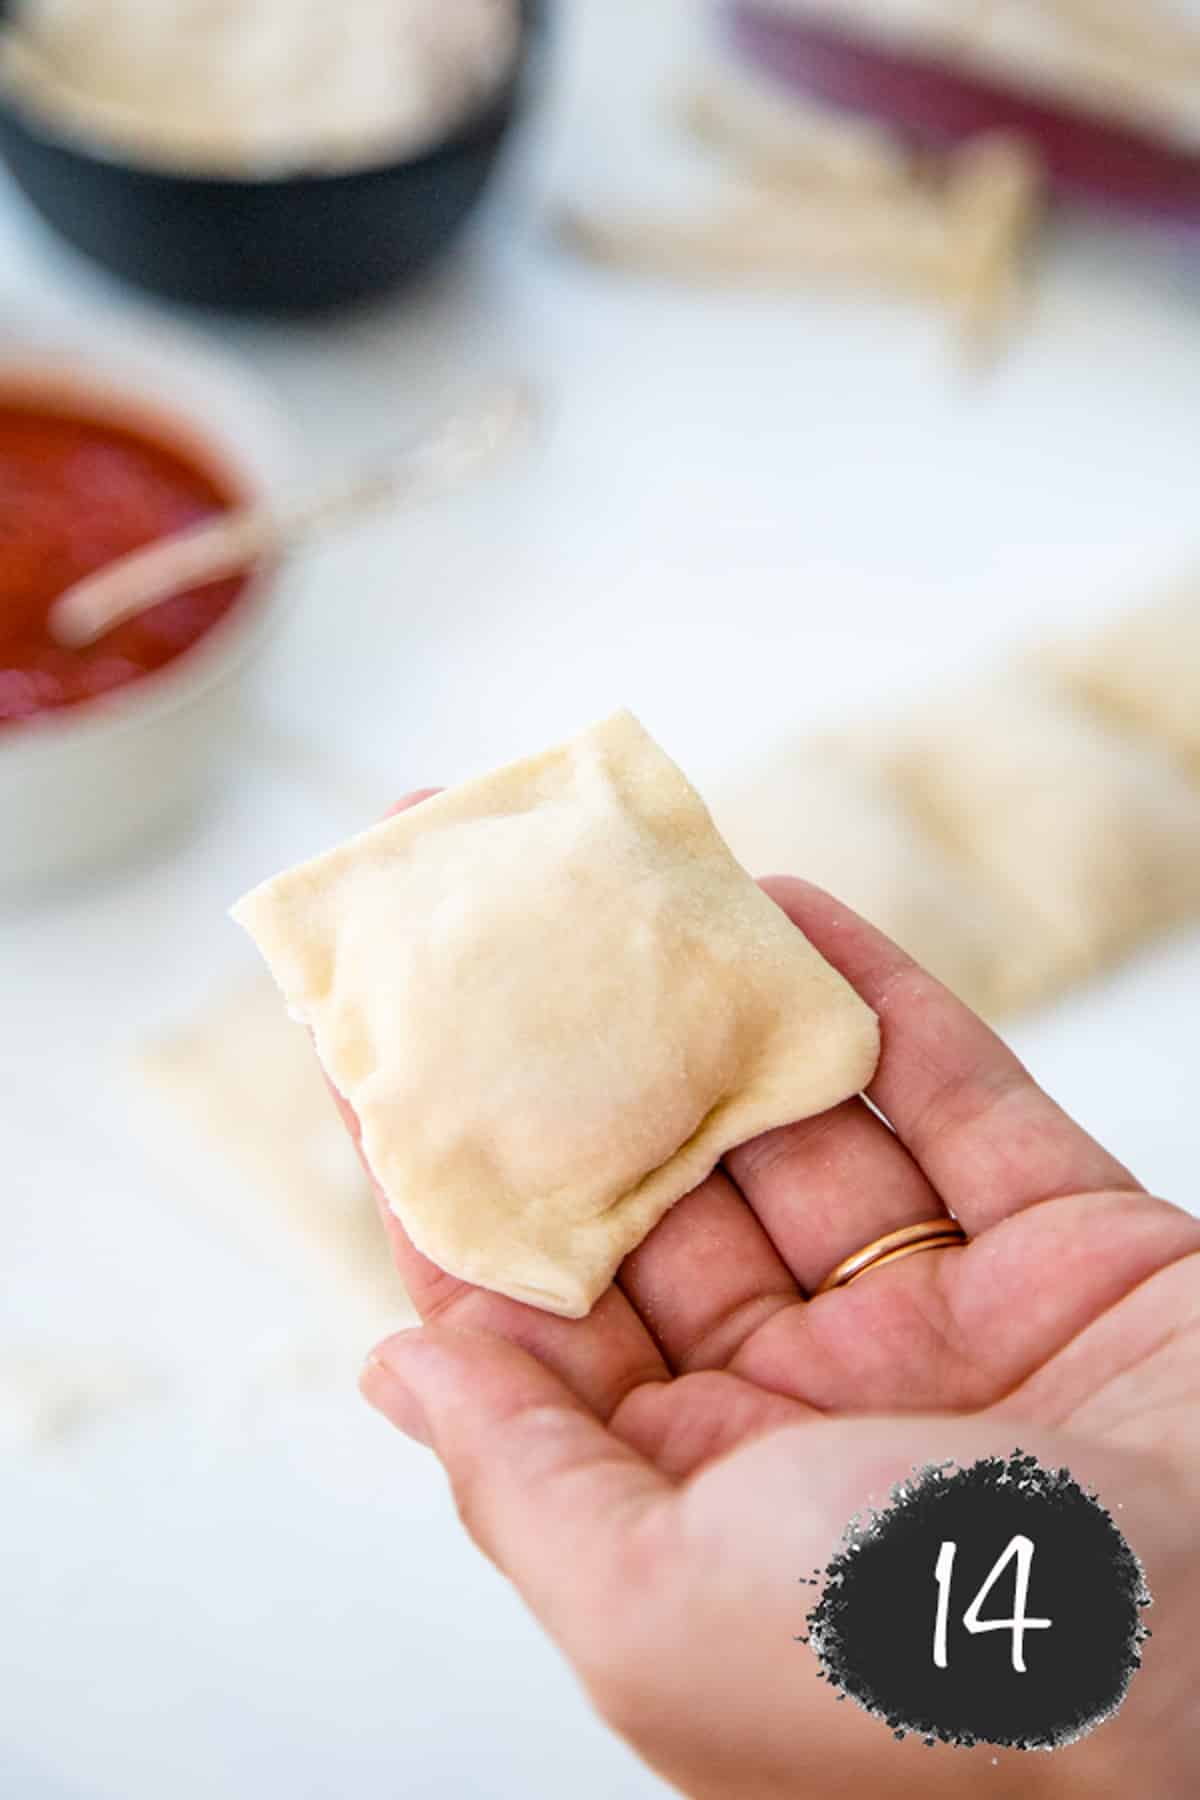 A hand holding an unbaked pizza roll.